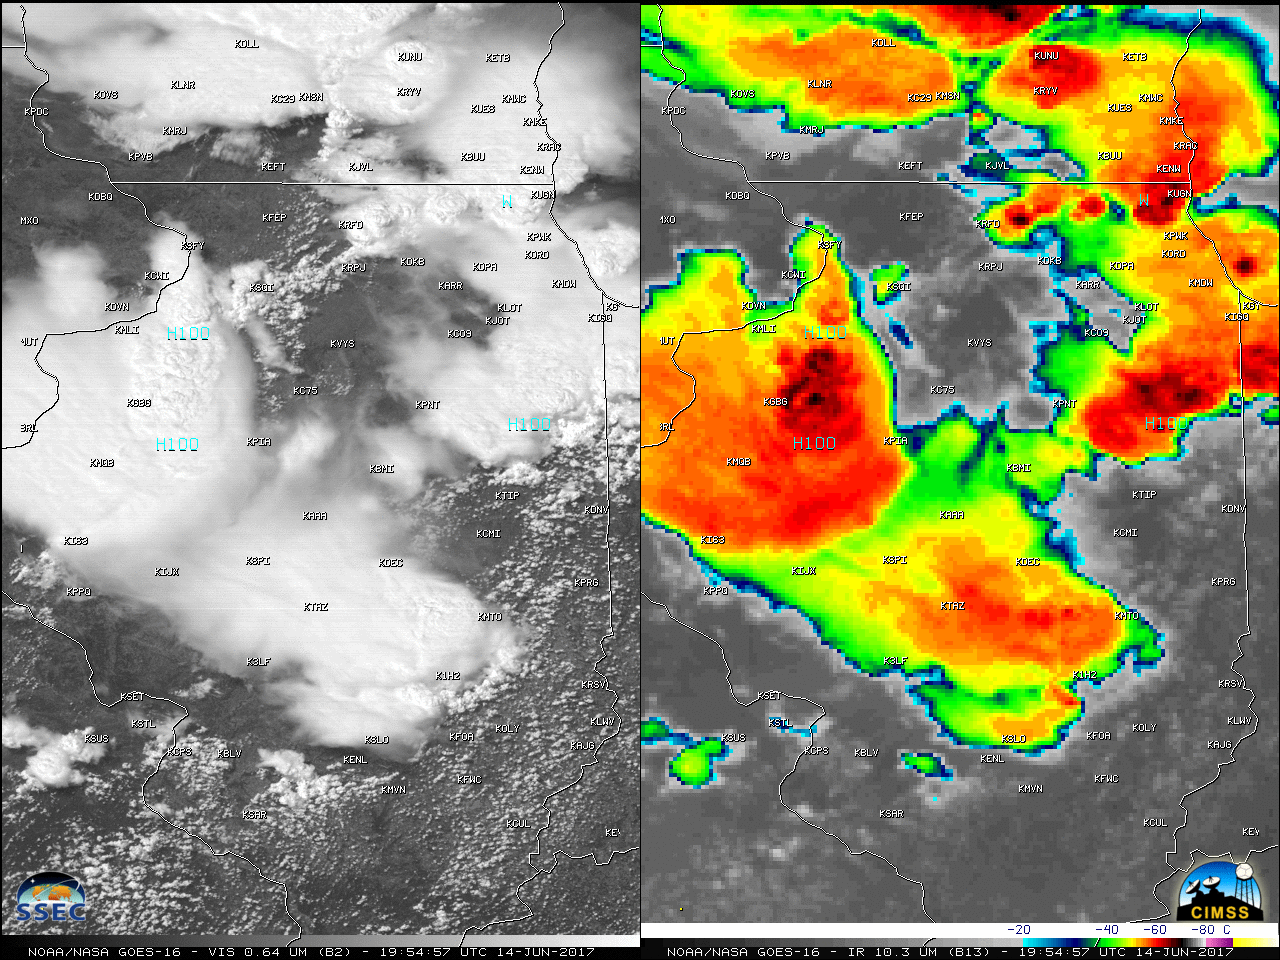 GOES-16 Visible (0.64 µm, left) and Infrared Window (10.3 µm, right) images, with station identifiers plotted in white and SPC storm reports plotted in cyan [click to play MP4 animation]